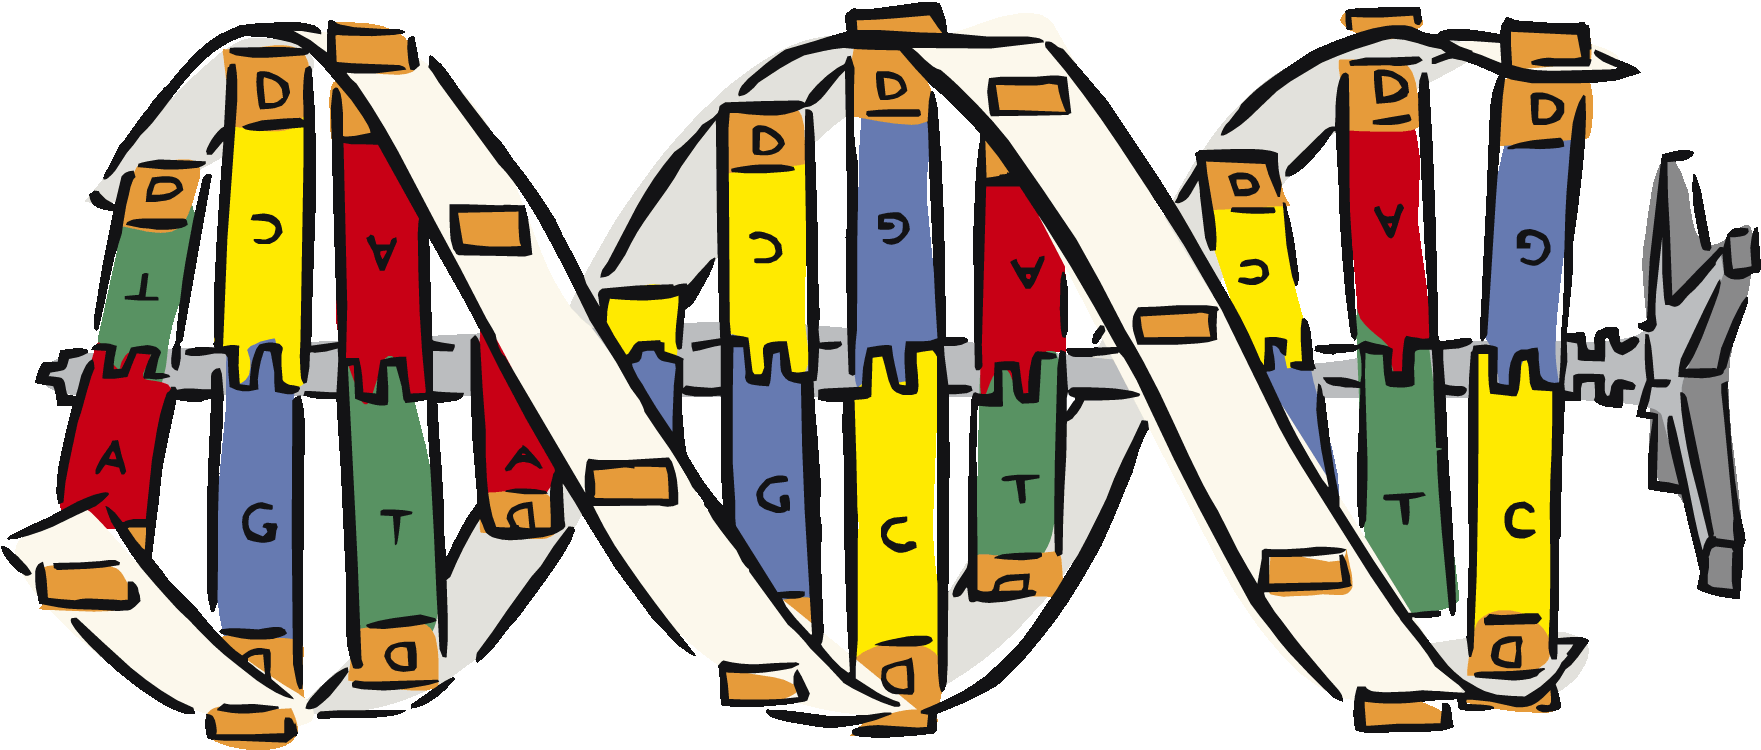 Cartoon Dna Chromosome Colorful Construction Free Image Download 4214